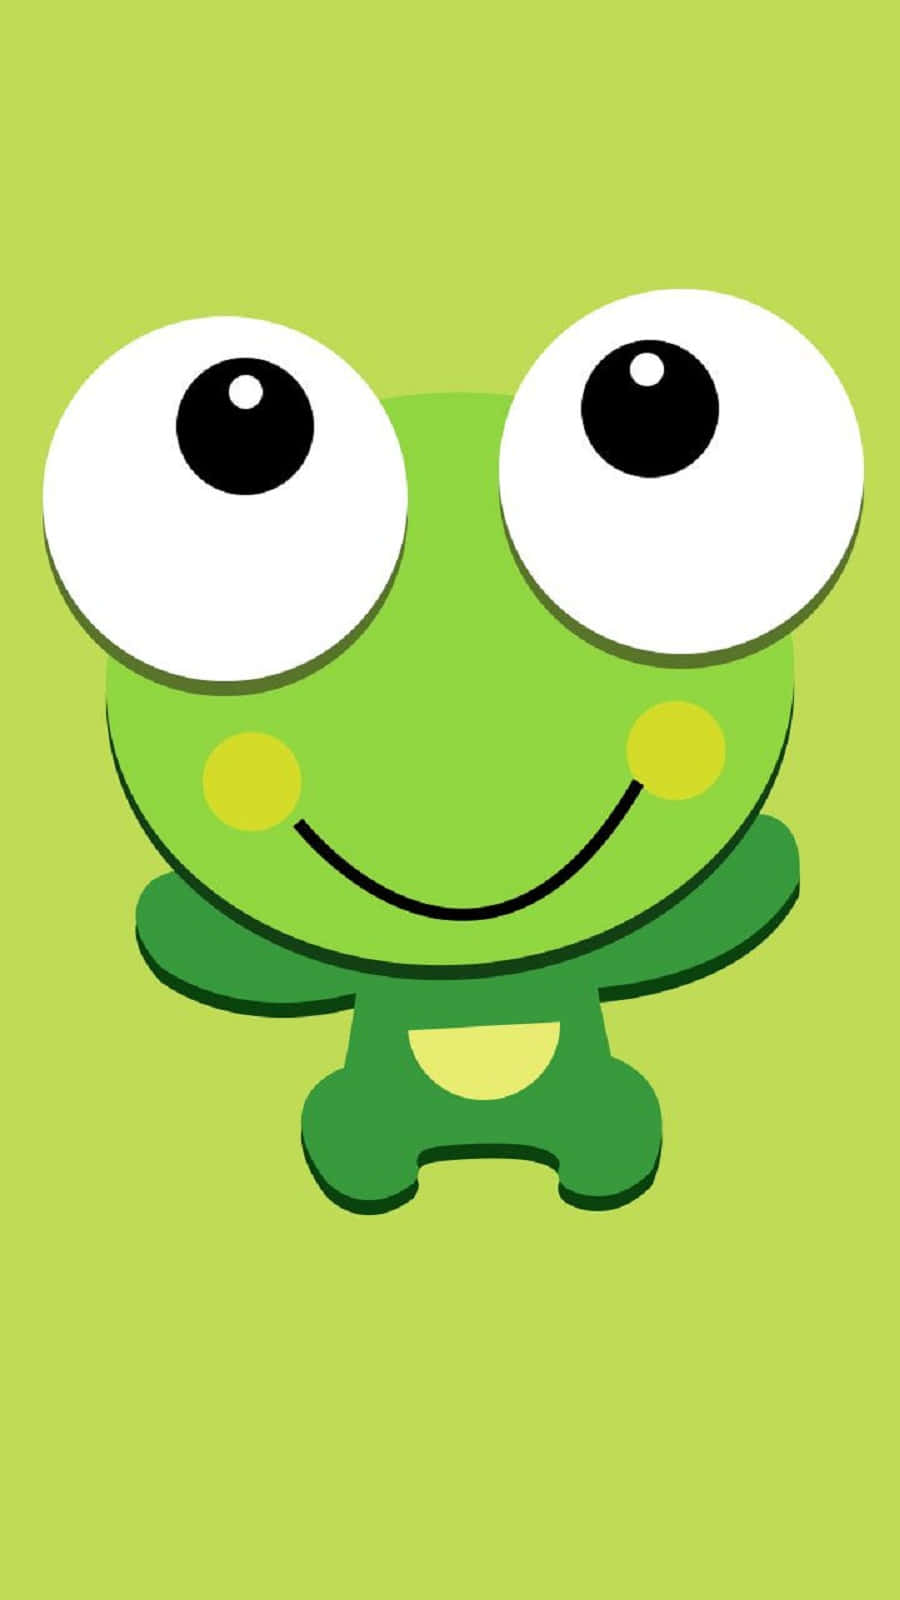 Look at how cute this frog is!